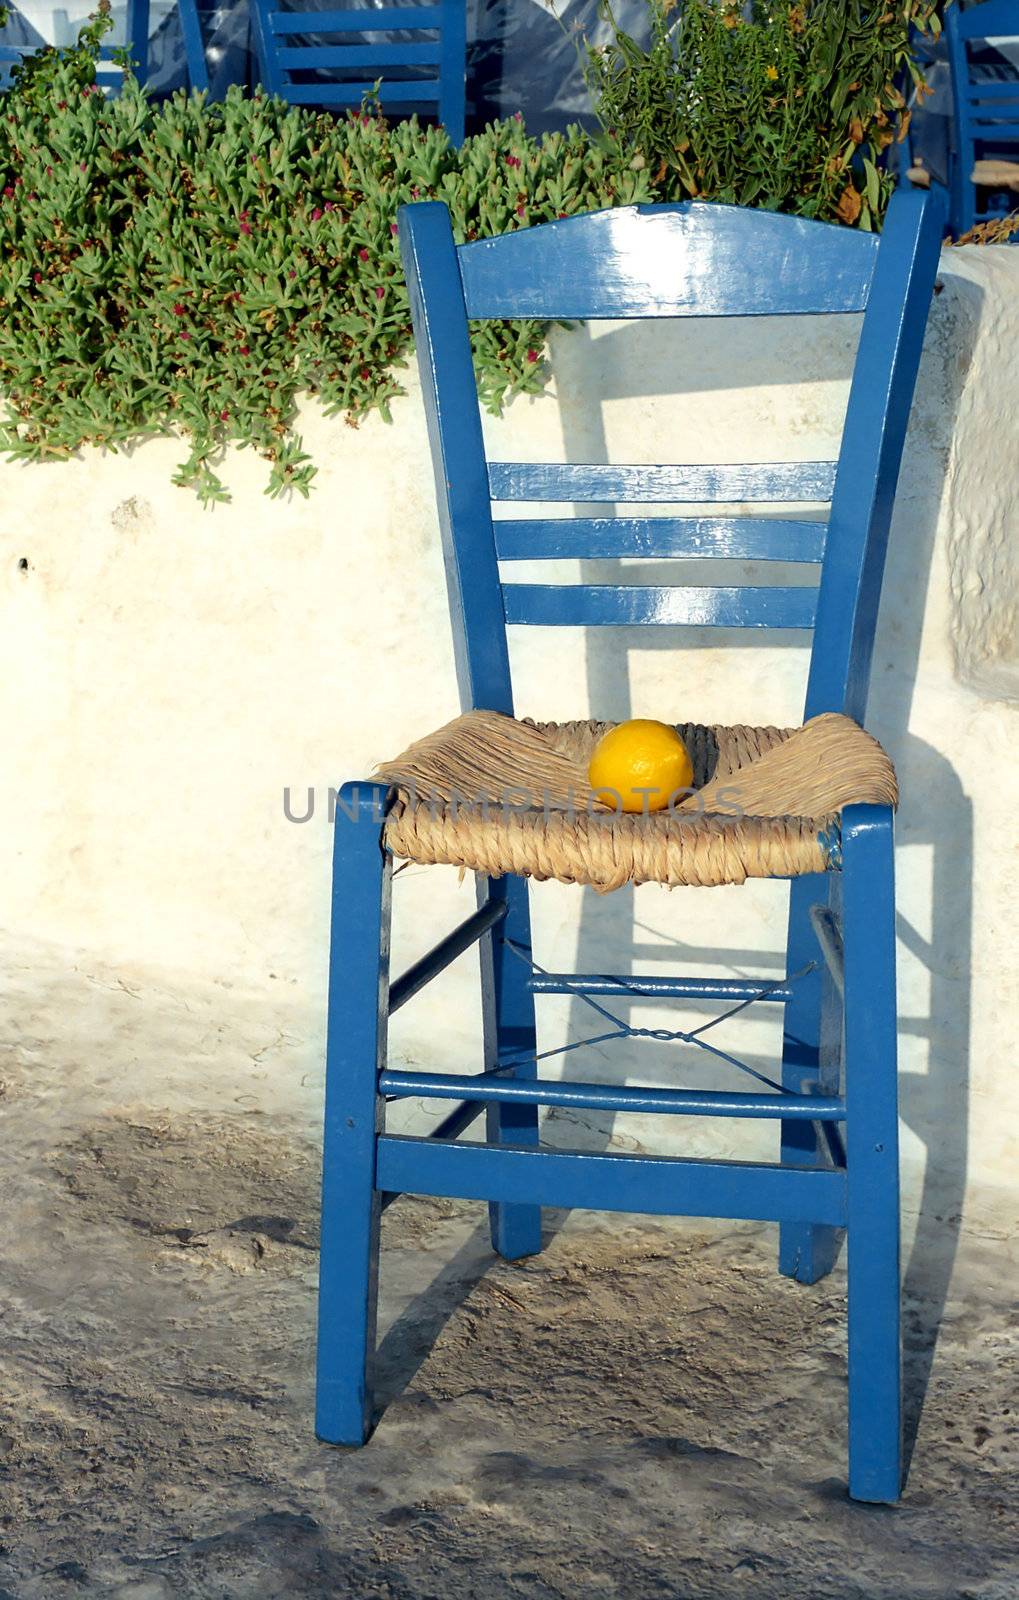 Lemon on the blue chair  by mulden